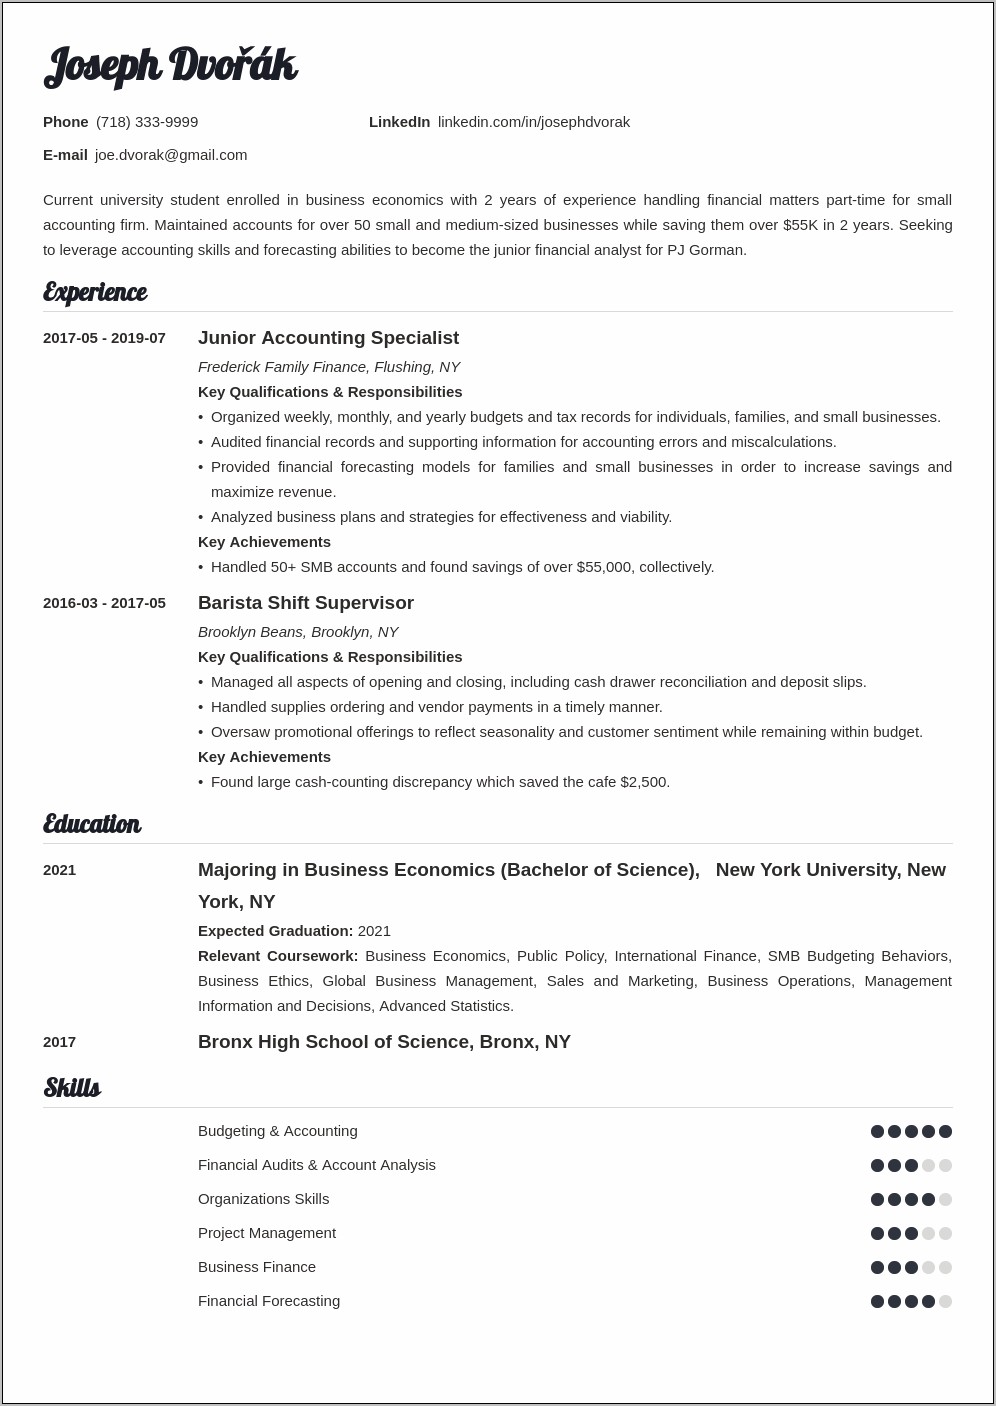 College Resume Examples For Transfer Students